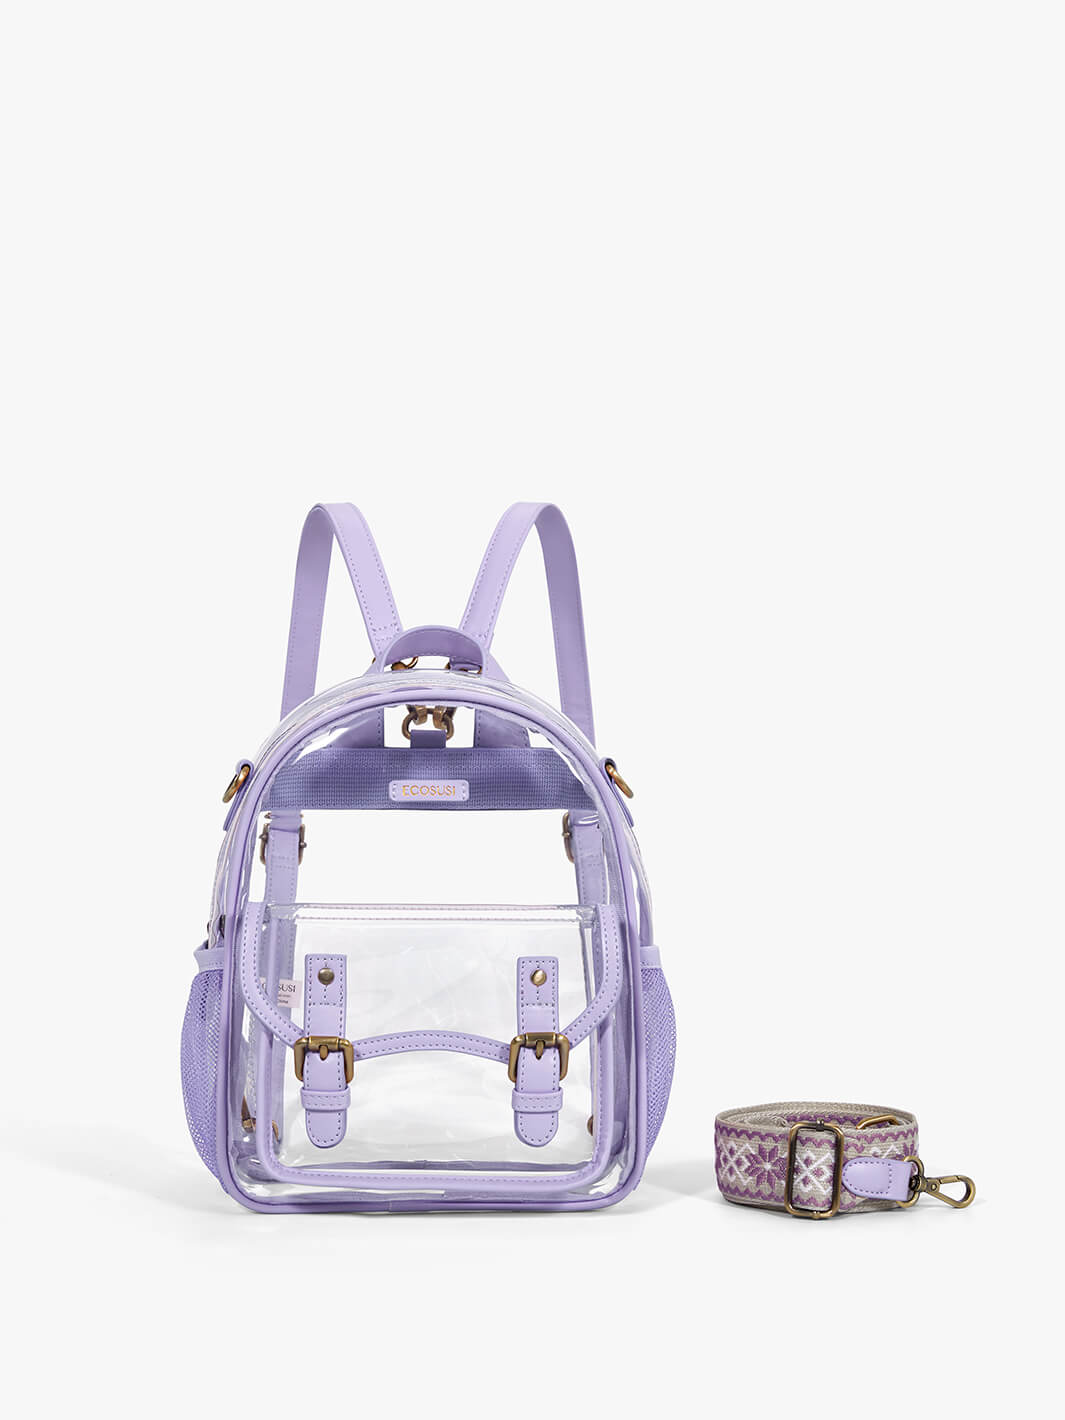 Clear Backpacks for School with Wide Shoulder Strap - ECOSUSI Purple Clear Backpack